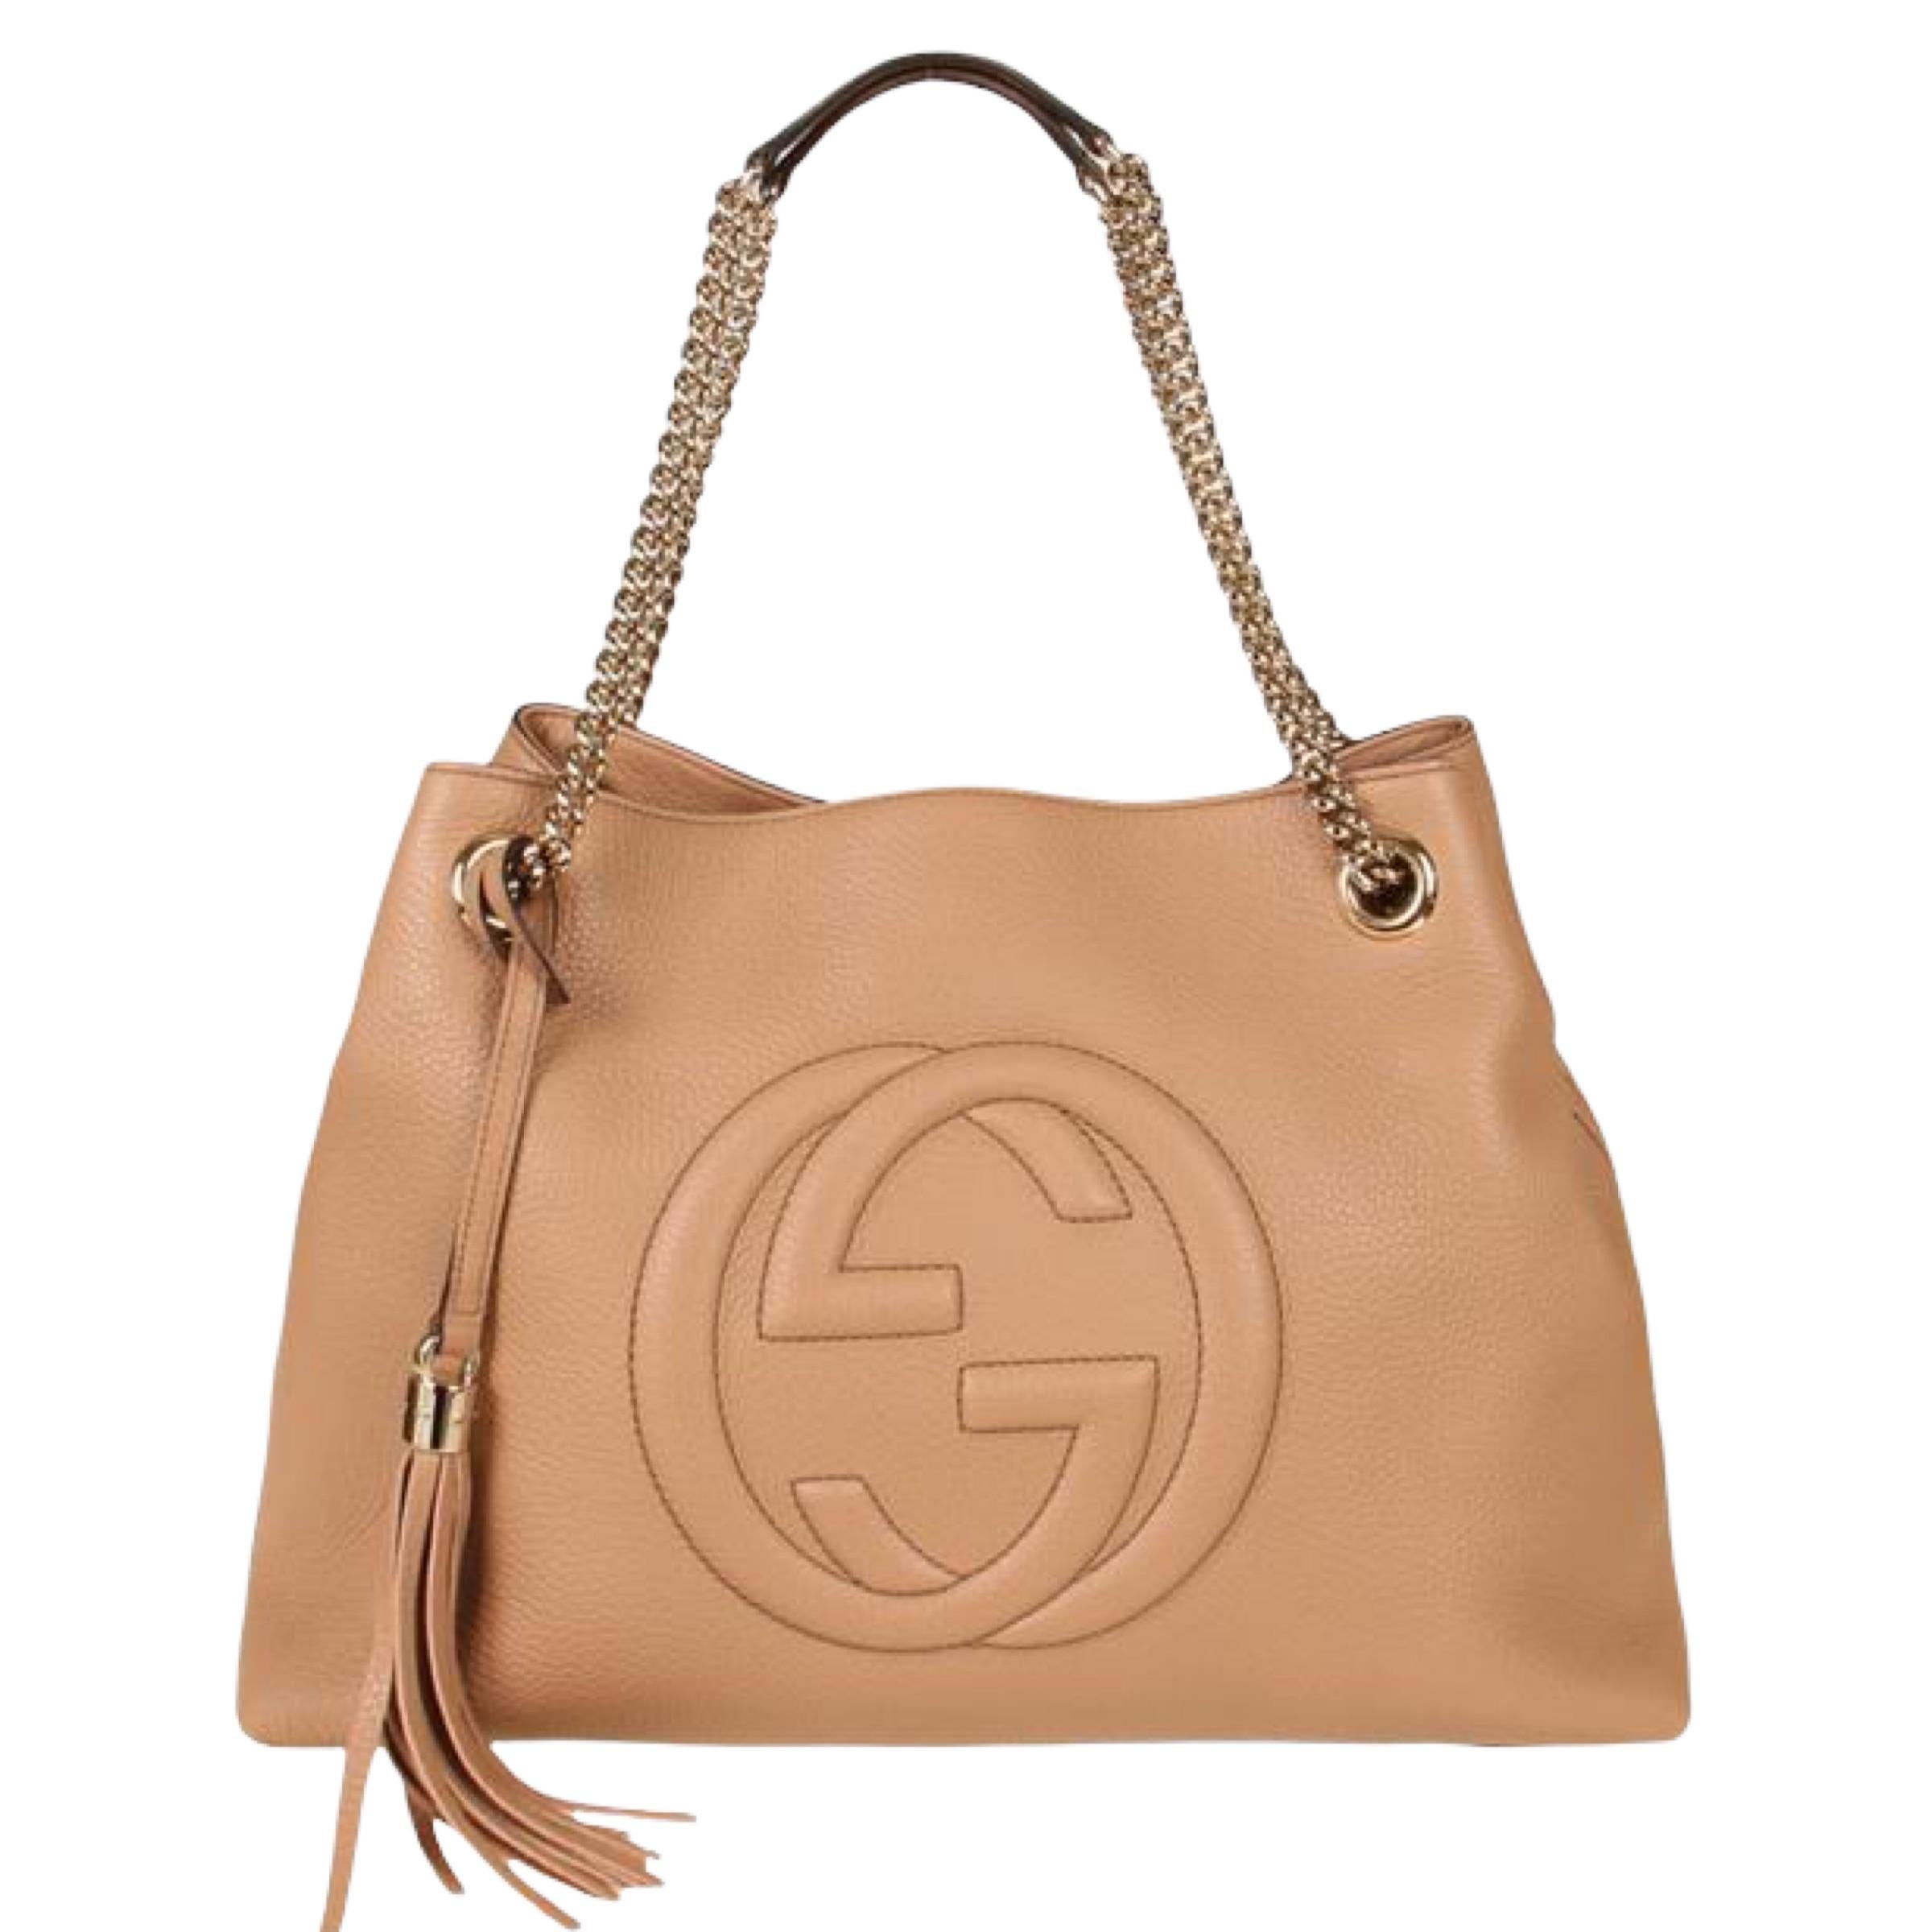 New Gucci Beige Pebbled Leather Medium Soho Chain Tote Shoulder Bag

Authenticity Guaranteed

DETAILS
Brand: Gucci
Condition: Brand new
Gender: Women
Category: Tote bag
Color: Beige
Material: Leather
Gucci soho logo 
Pebbled leather
Detachable